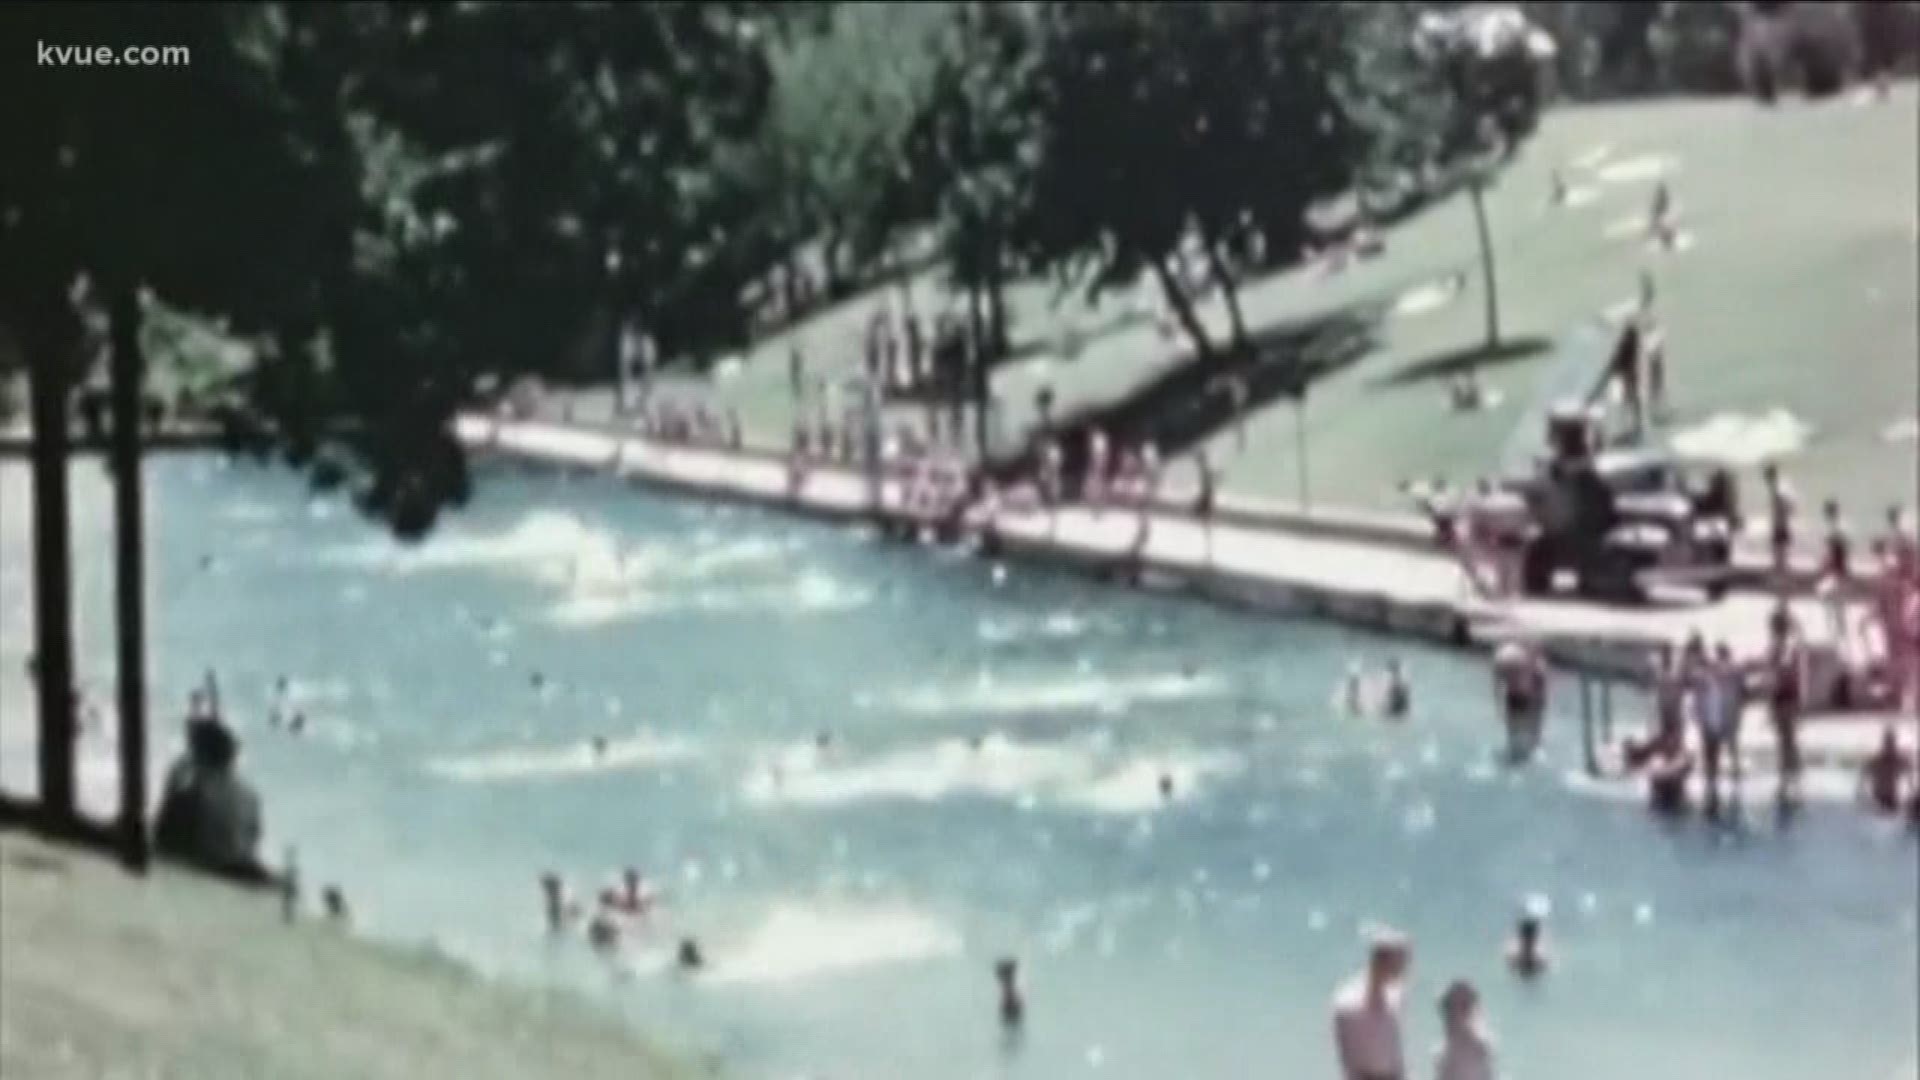 We travel back in time, thanks to a rare movie that long ago encouraged people to make Austin their new home.